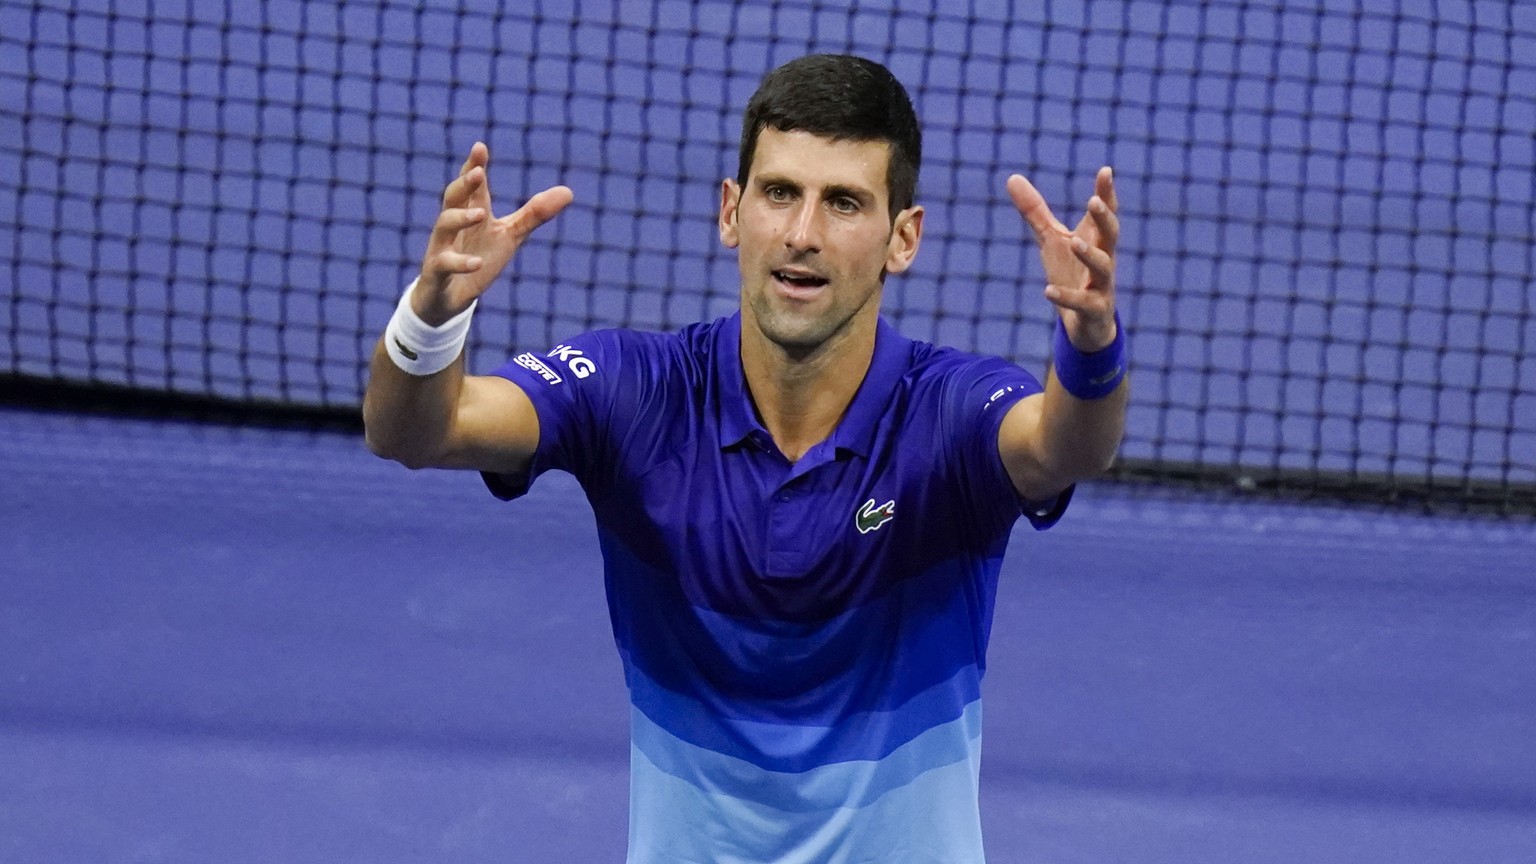 Novak Djokovic, of Serbia, reacts after defeating Alexander Zverev, of Germany, during the semifinals of the US Open tennis championships, Friday, Sept. 10, 2021, in New York. (AP Photo/Seth Wenig)